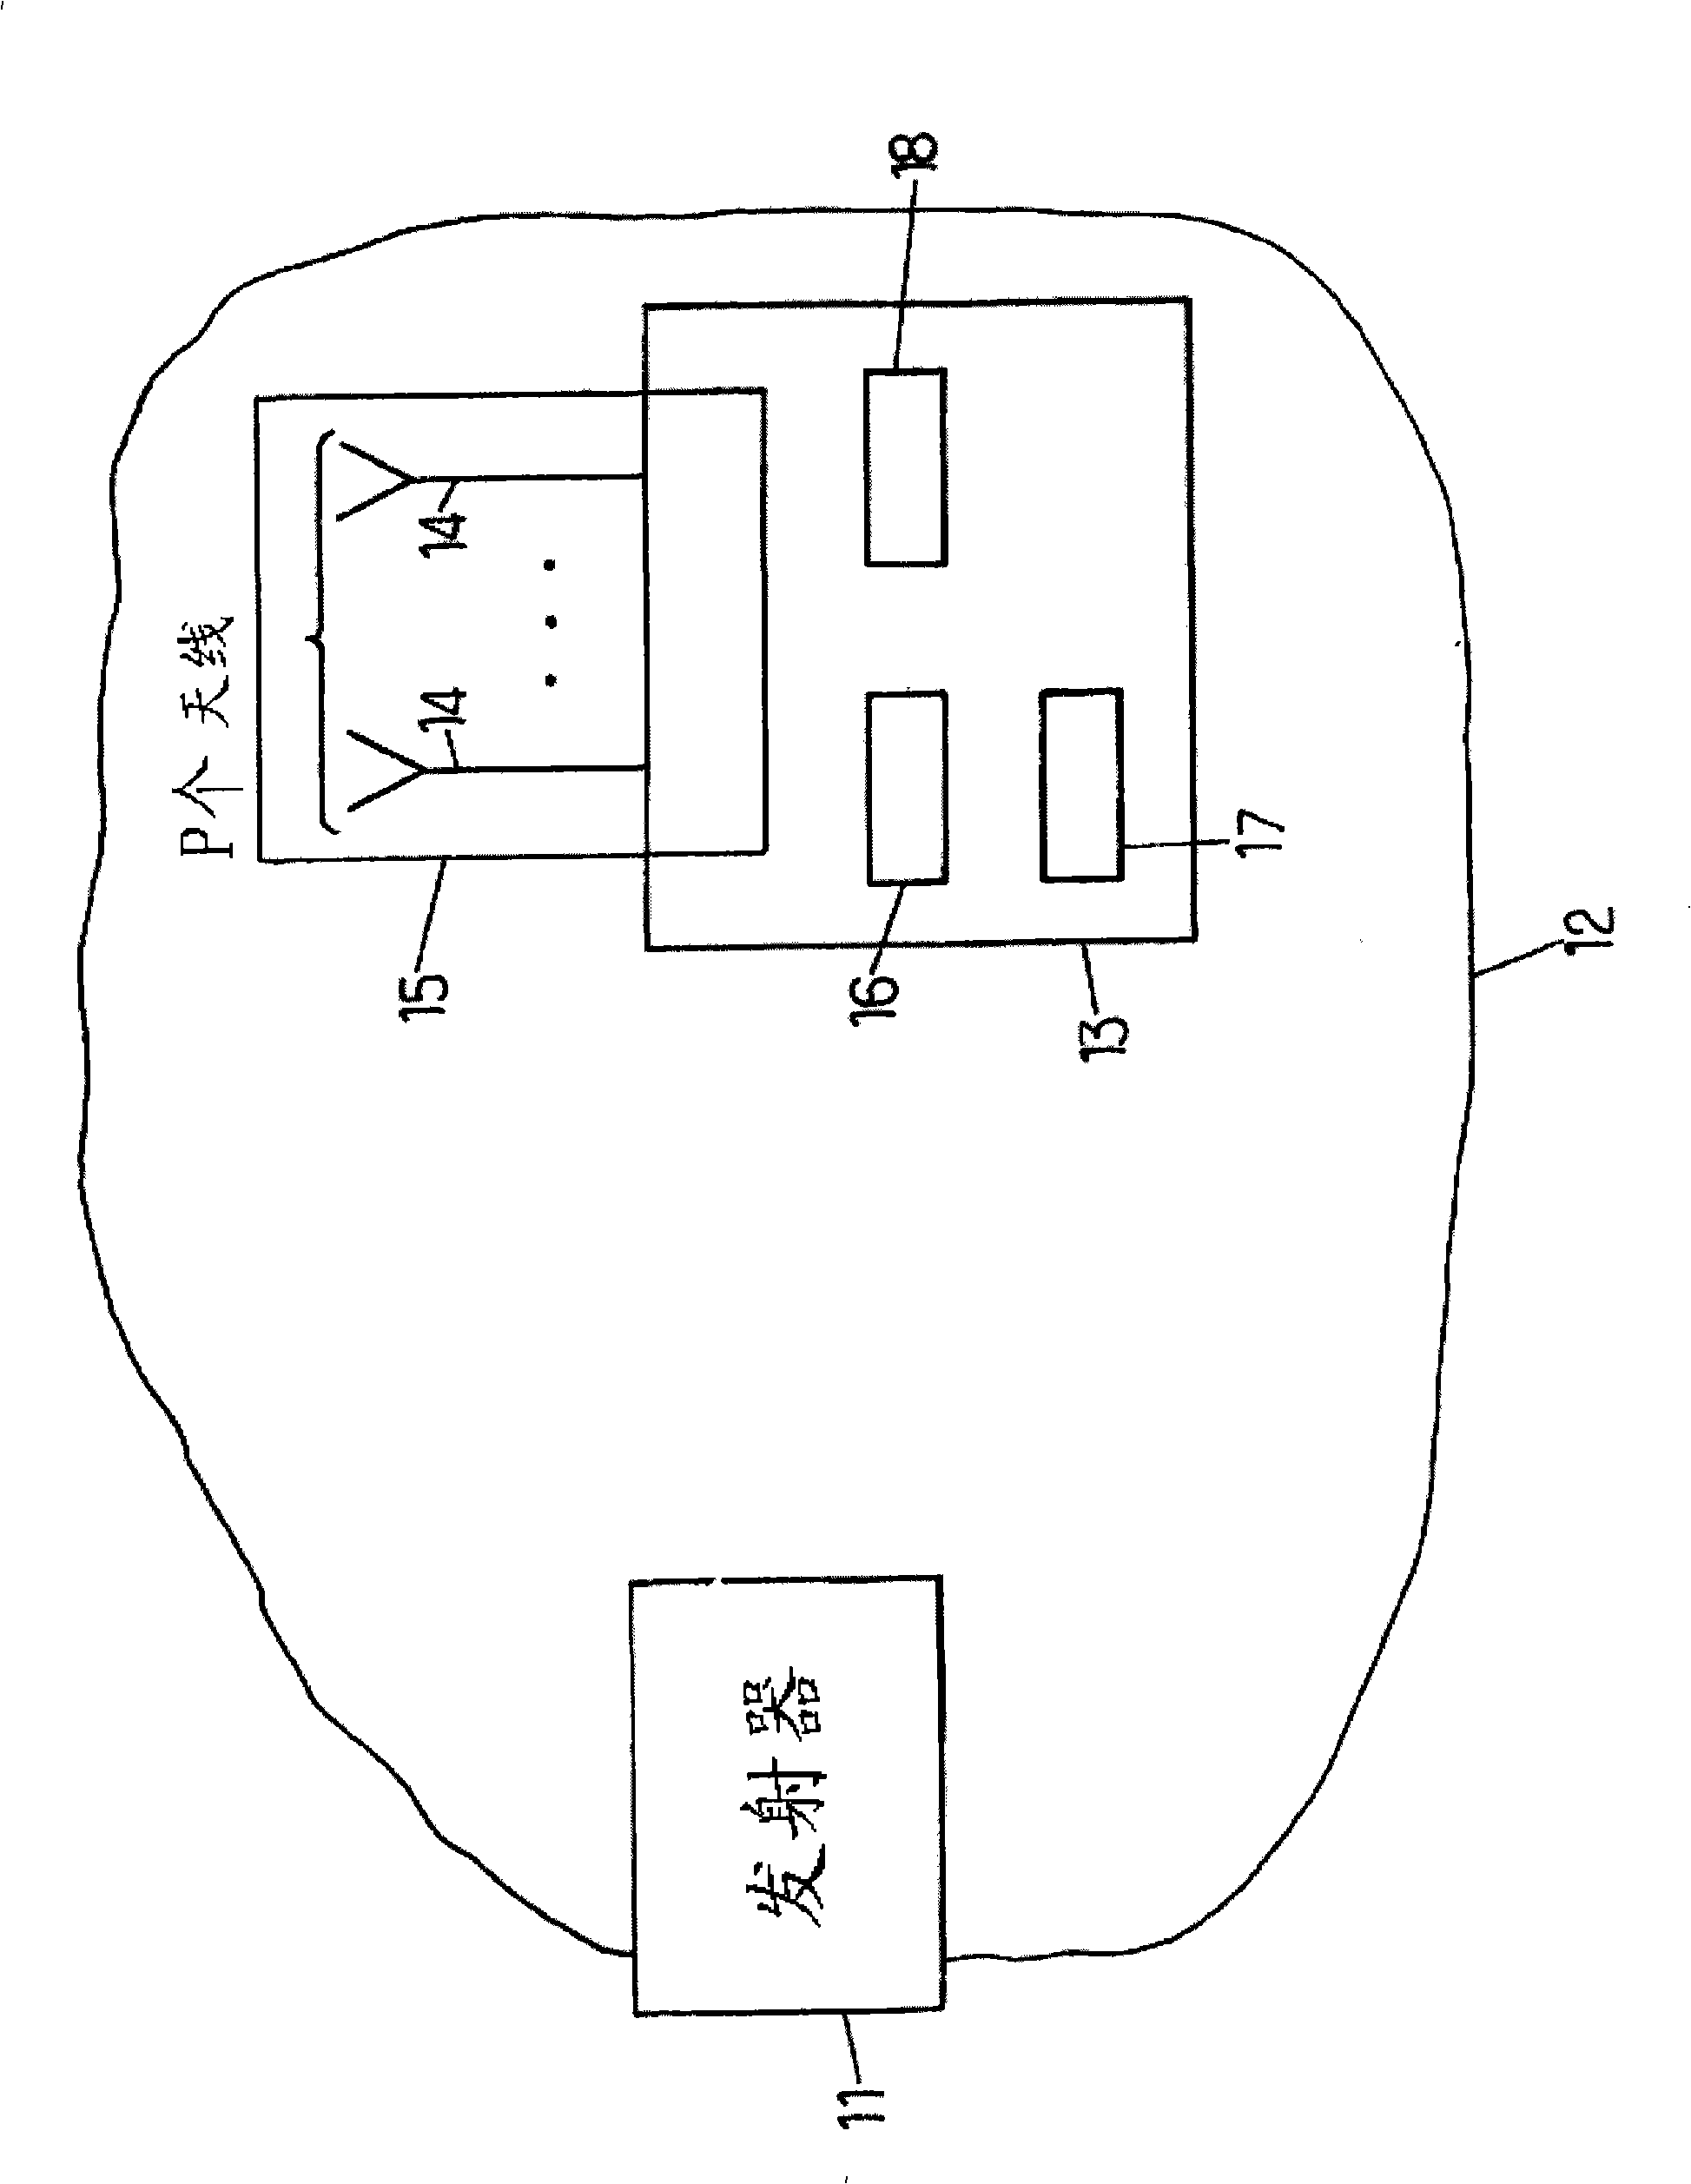 Noise power interpolation in a multi-carrier system